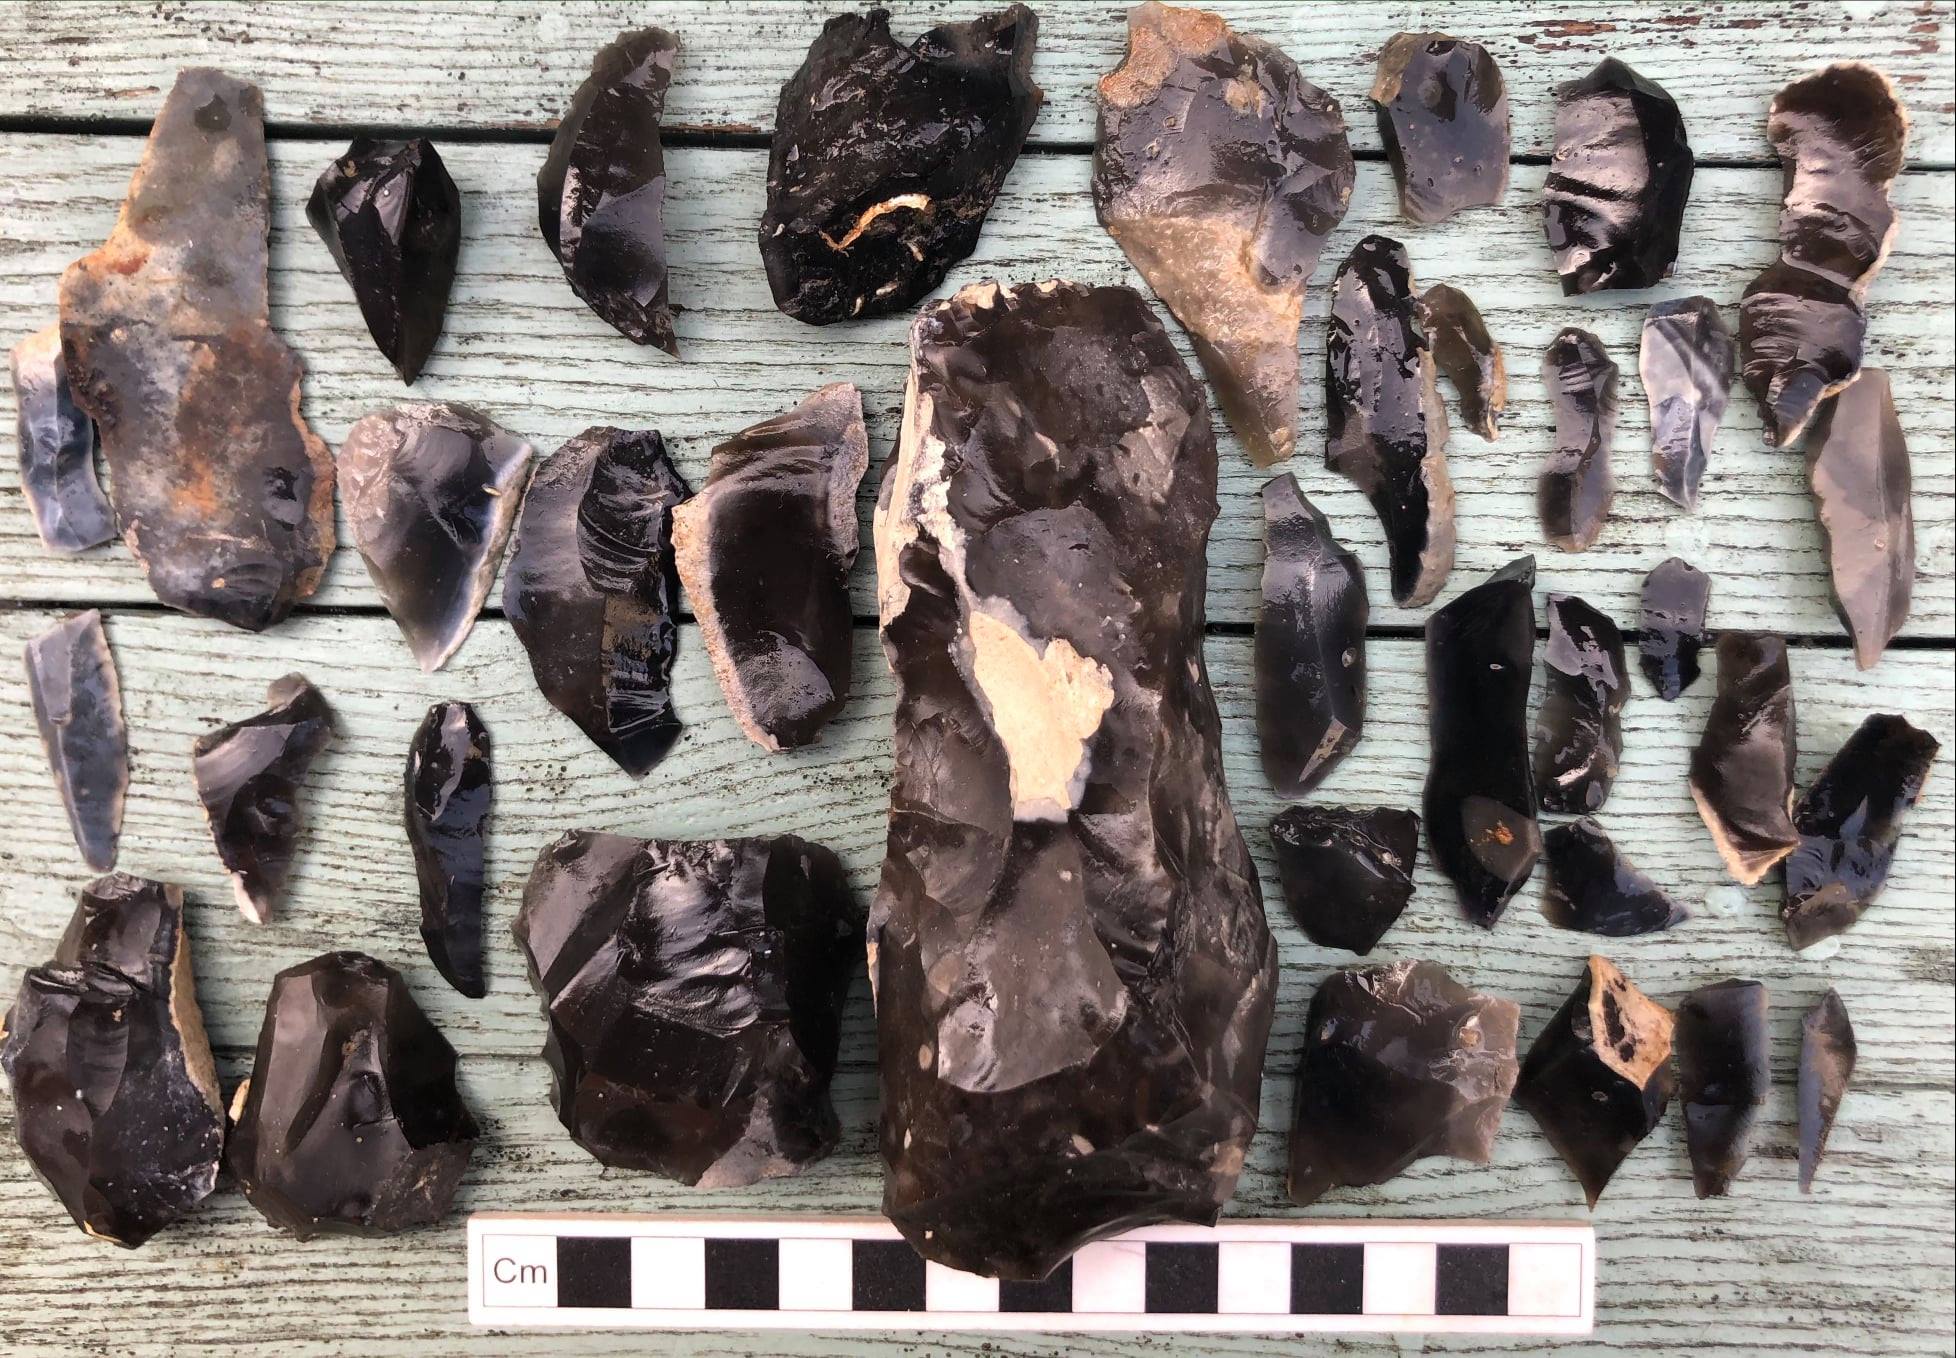 They will recover more archaeological artifacts and environmental markers to gain further insights into the area's historical conditions.<em>Note: These flints were found on the submerged Bouldnor Cliff landscape, off the Isle of Wight.</em>